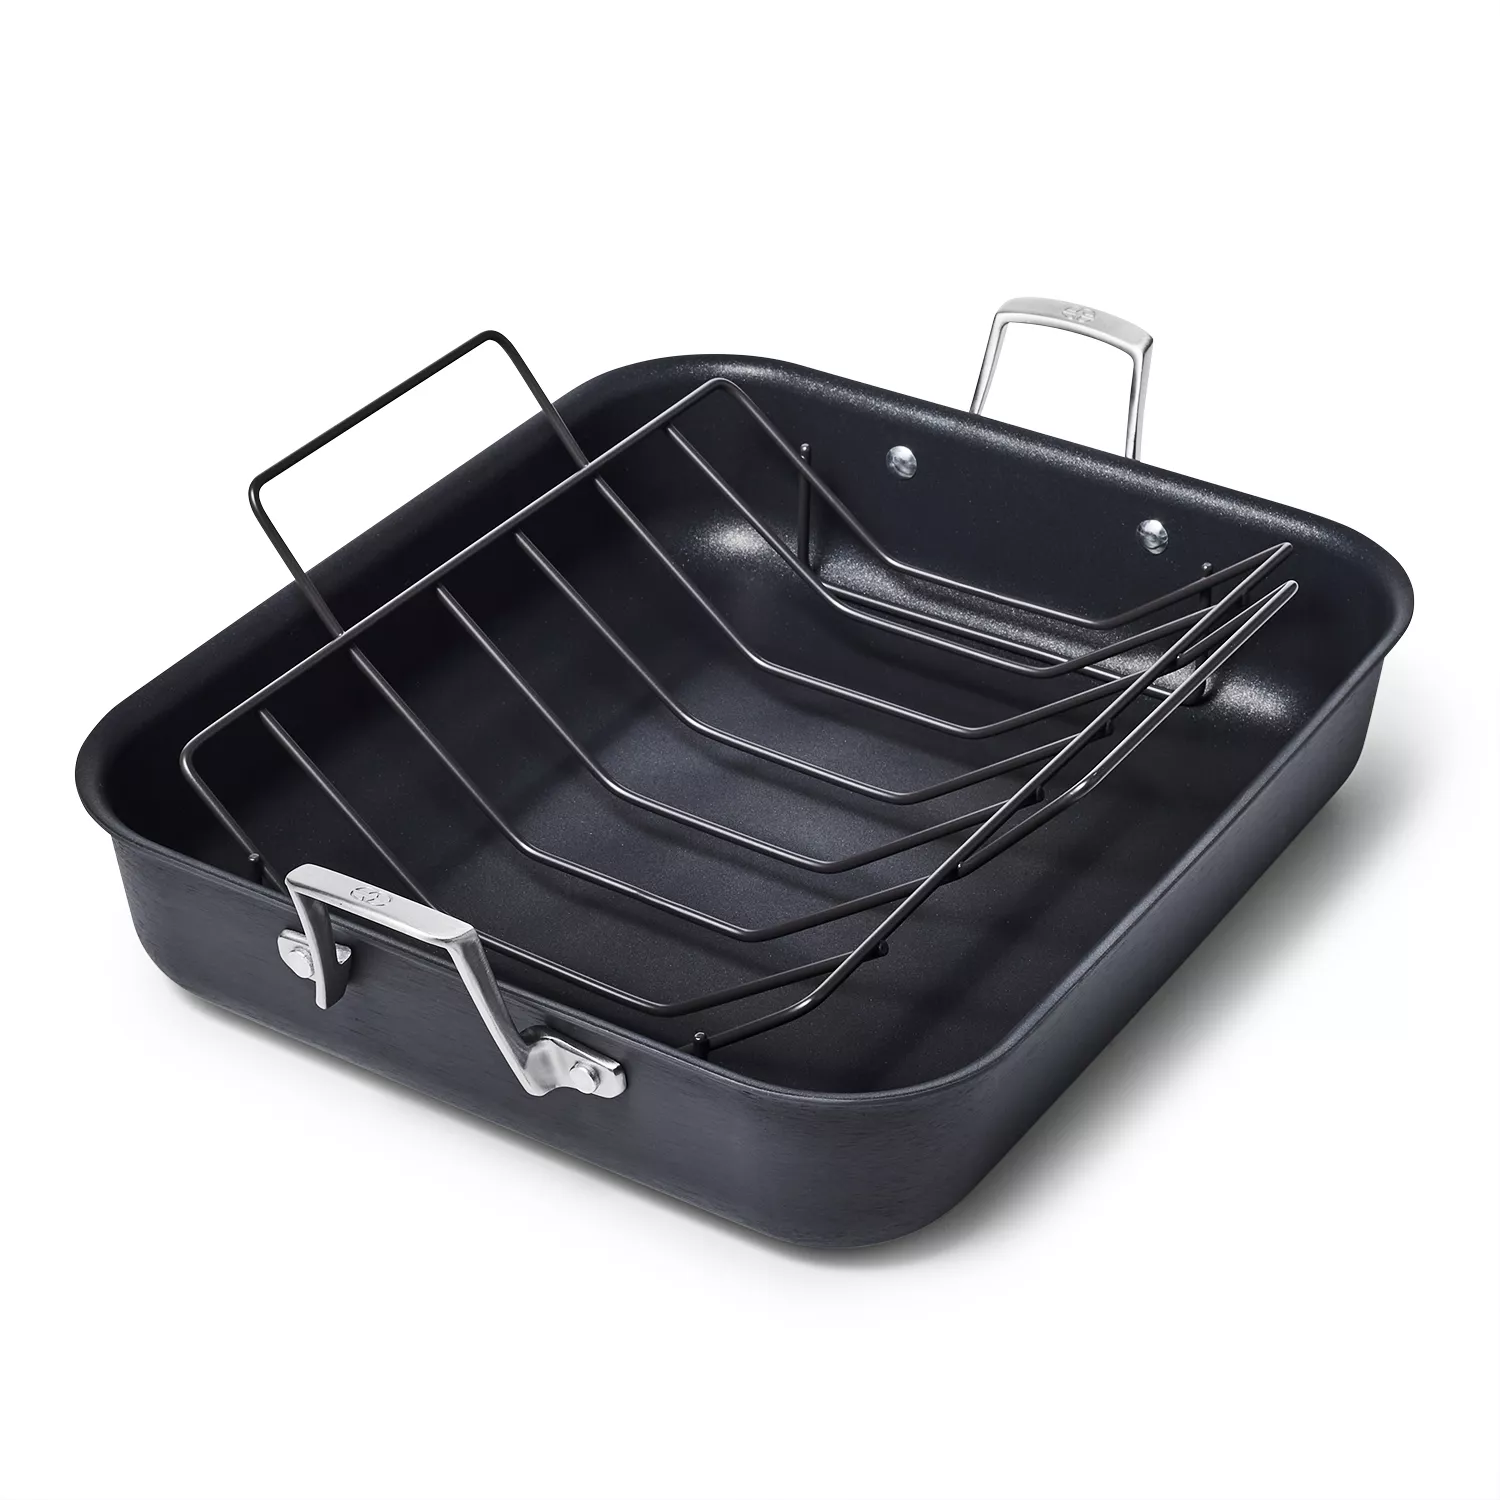 Calphalon Premier Hard-Anodized Nonstick 16in Roasting Pan with Rack